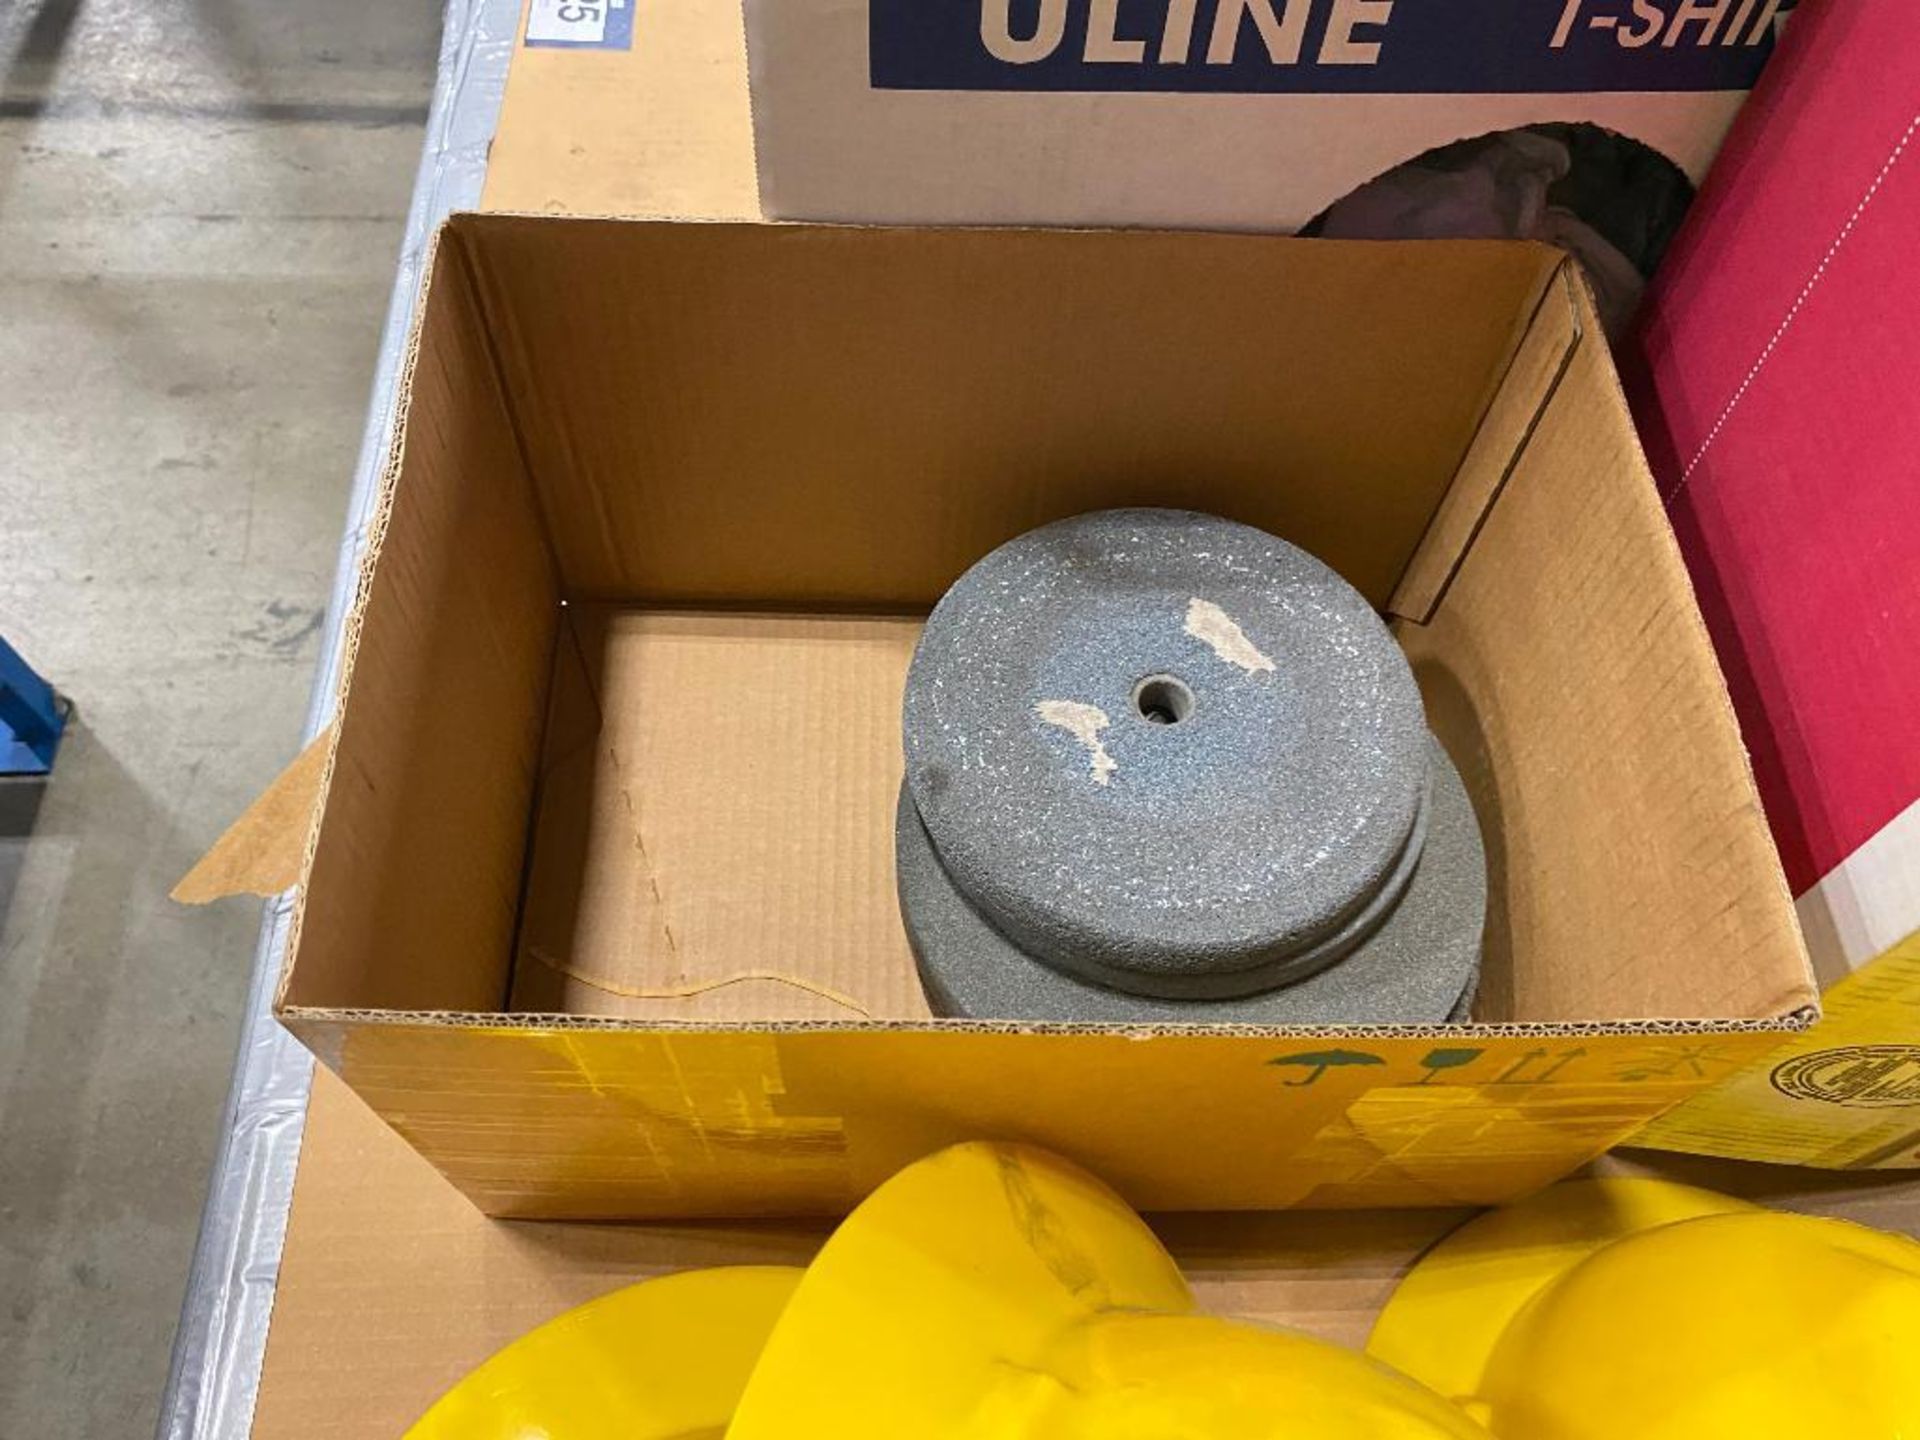 Lot of Shop Rags, Hard Hats, Scotch Brite Pads, Grinding Wheels, etc. - Image 3 of 3